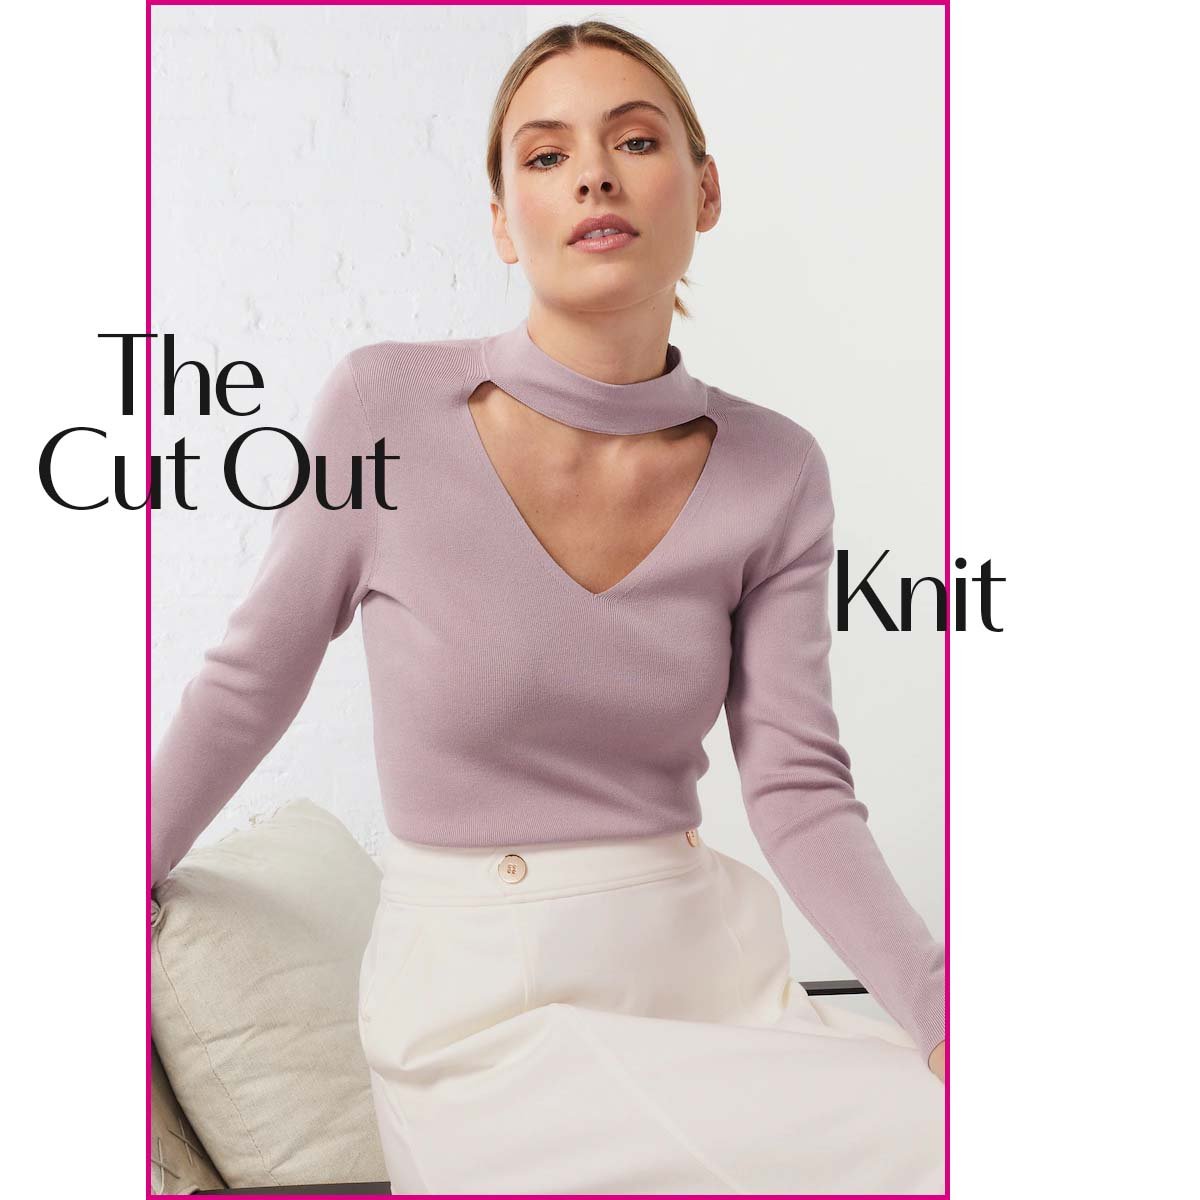 The Cut Out Knit